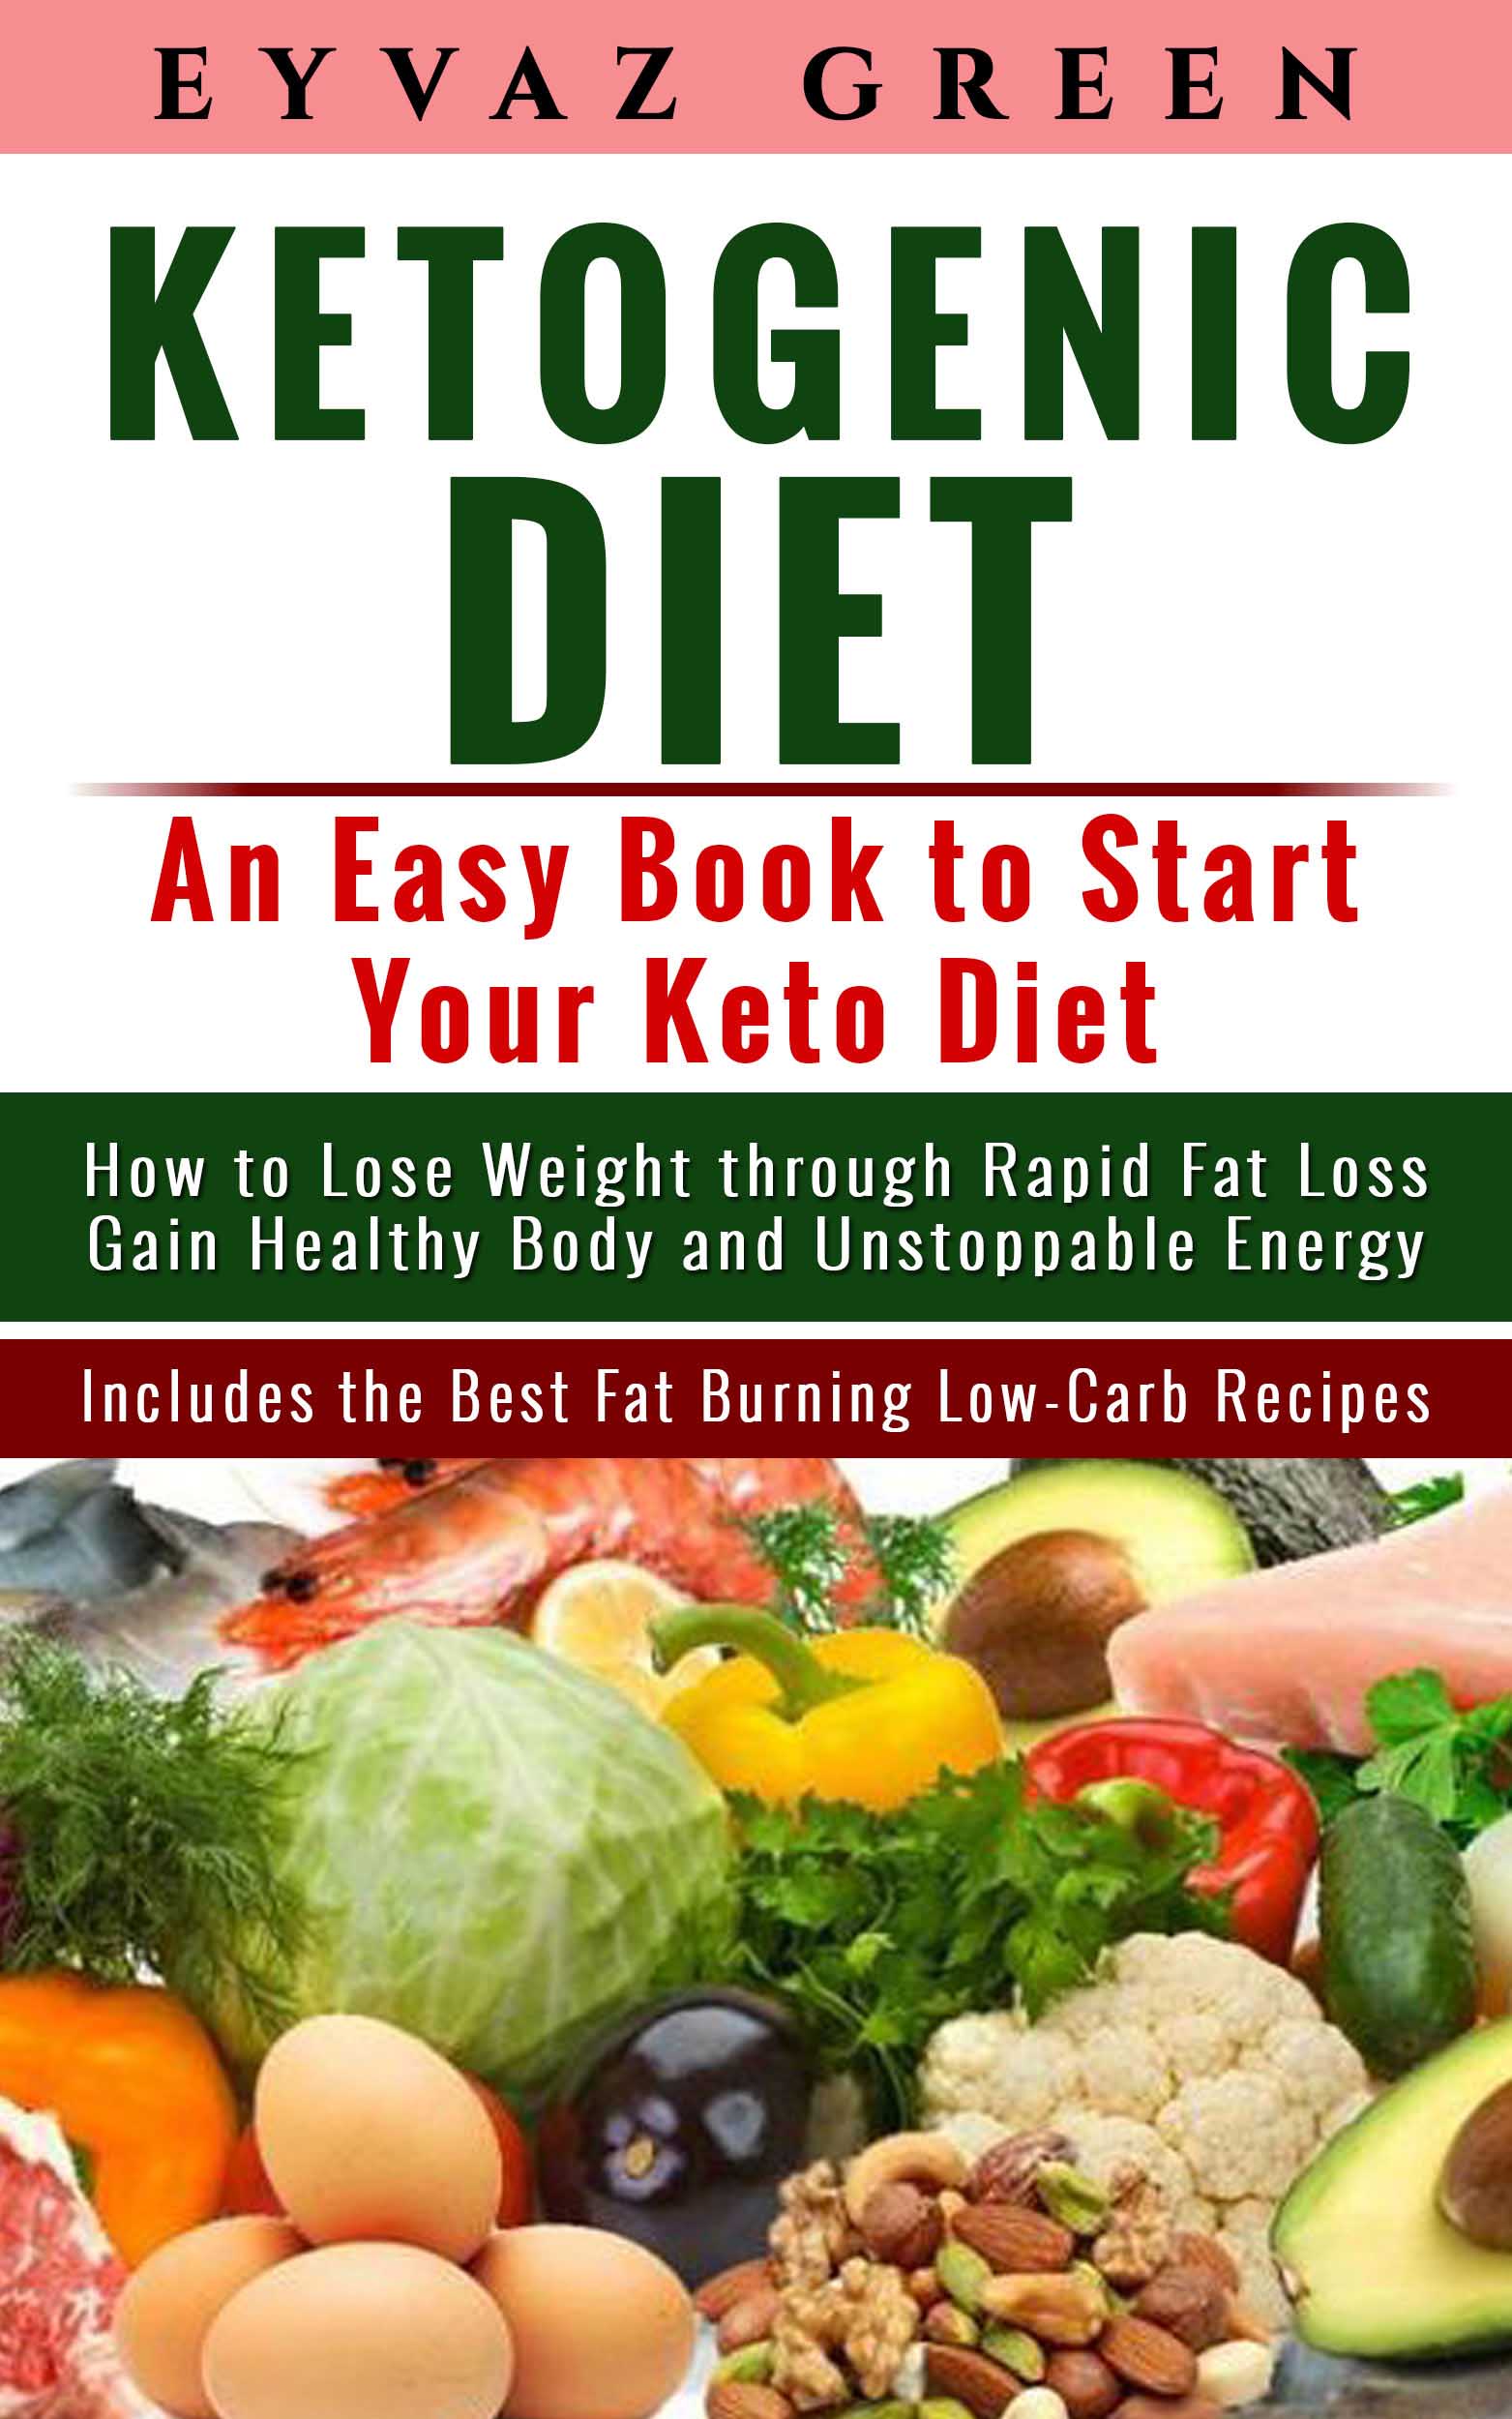 FREE: Ketogenic Diet: An Easy Book to Start Your Keto Diet. by Eyvaz Green